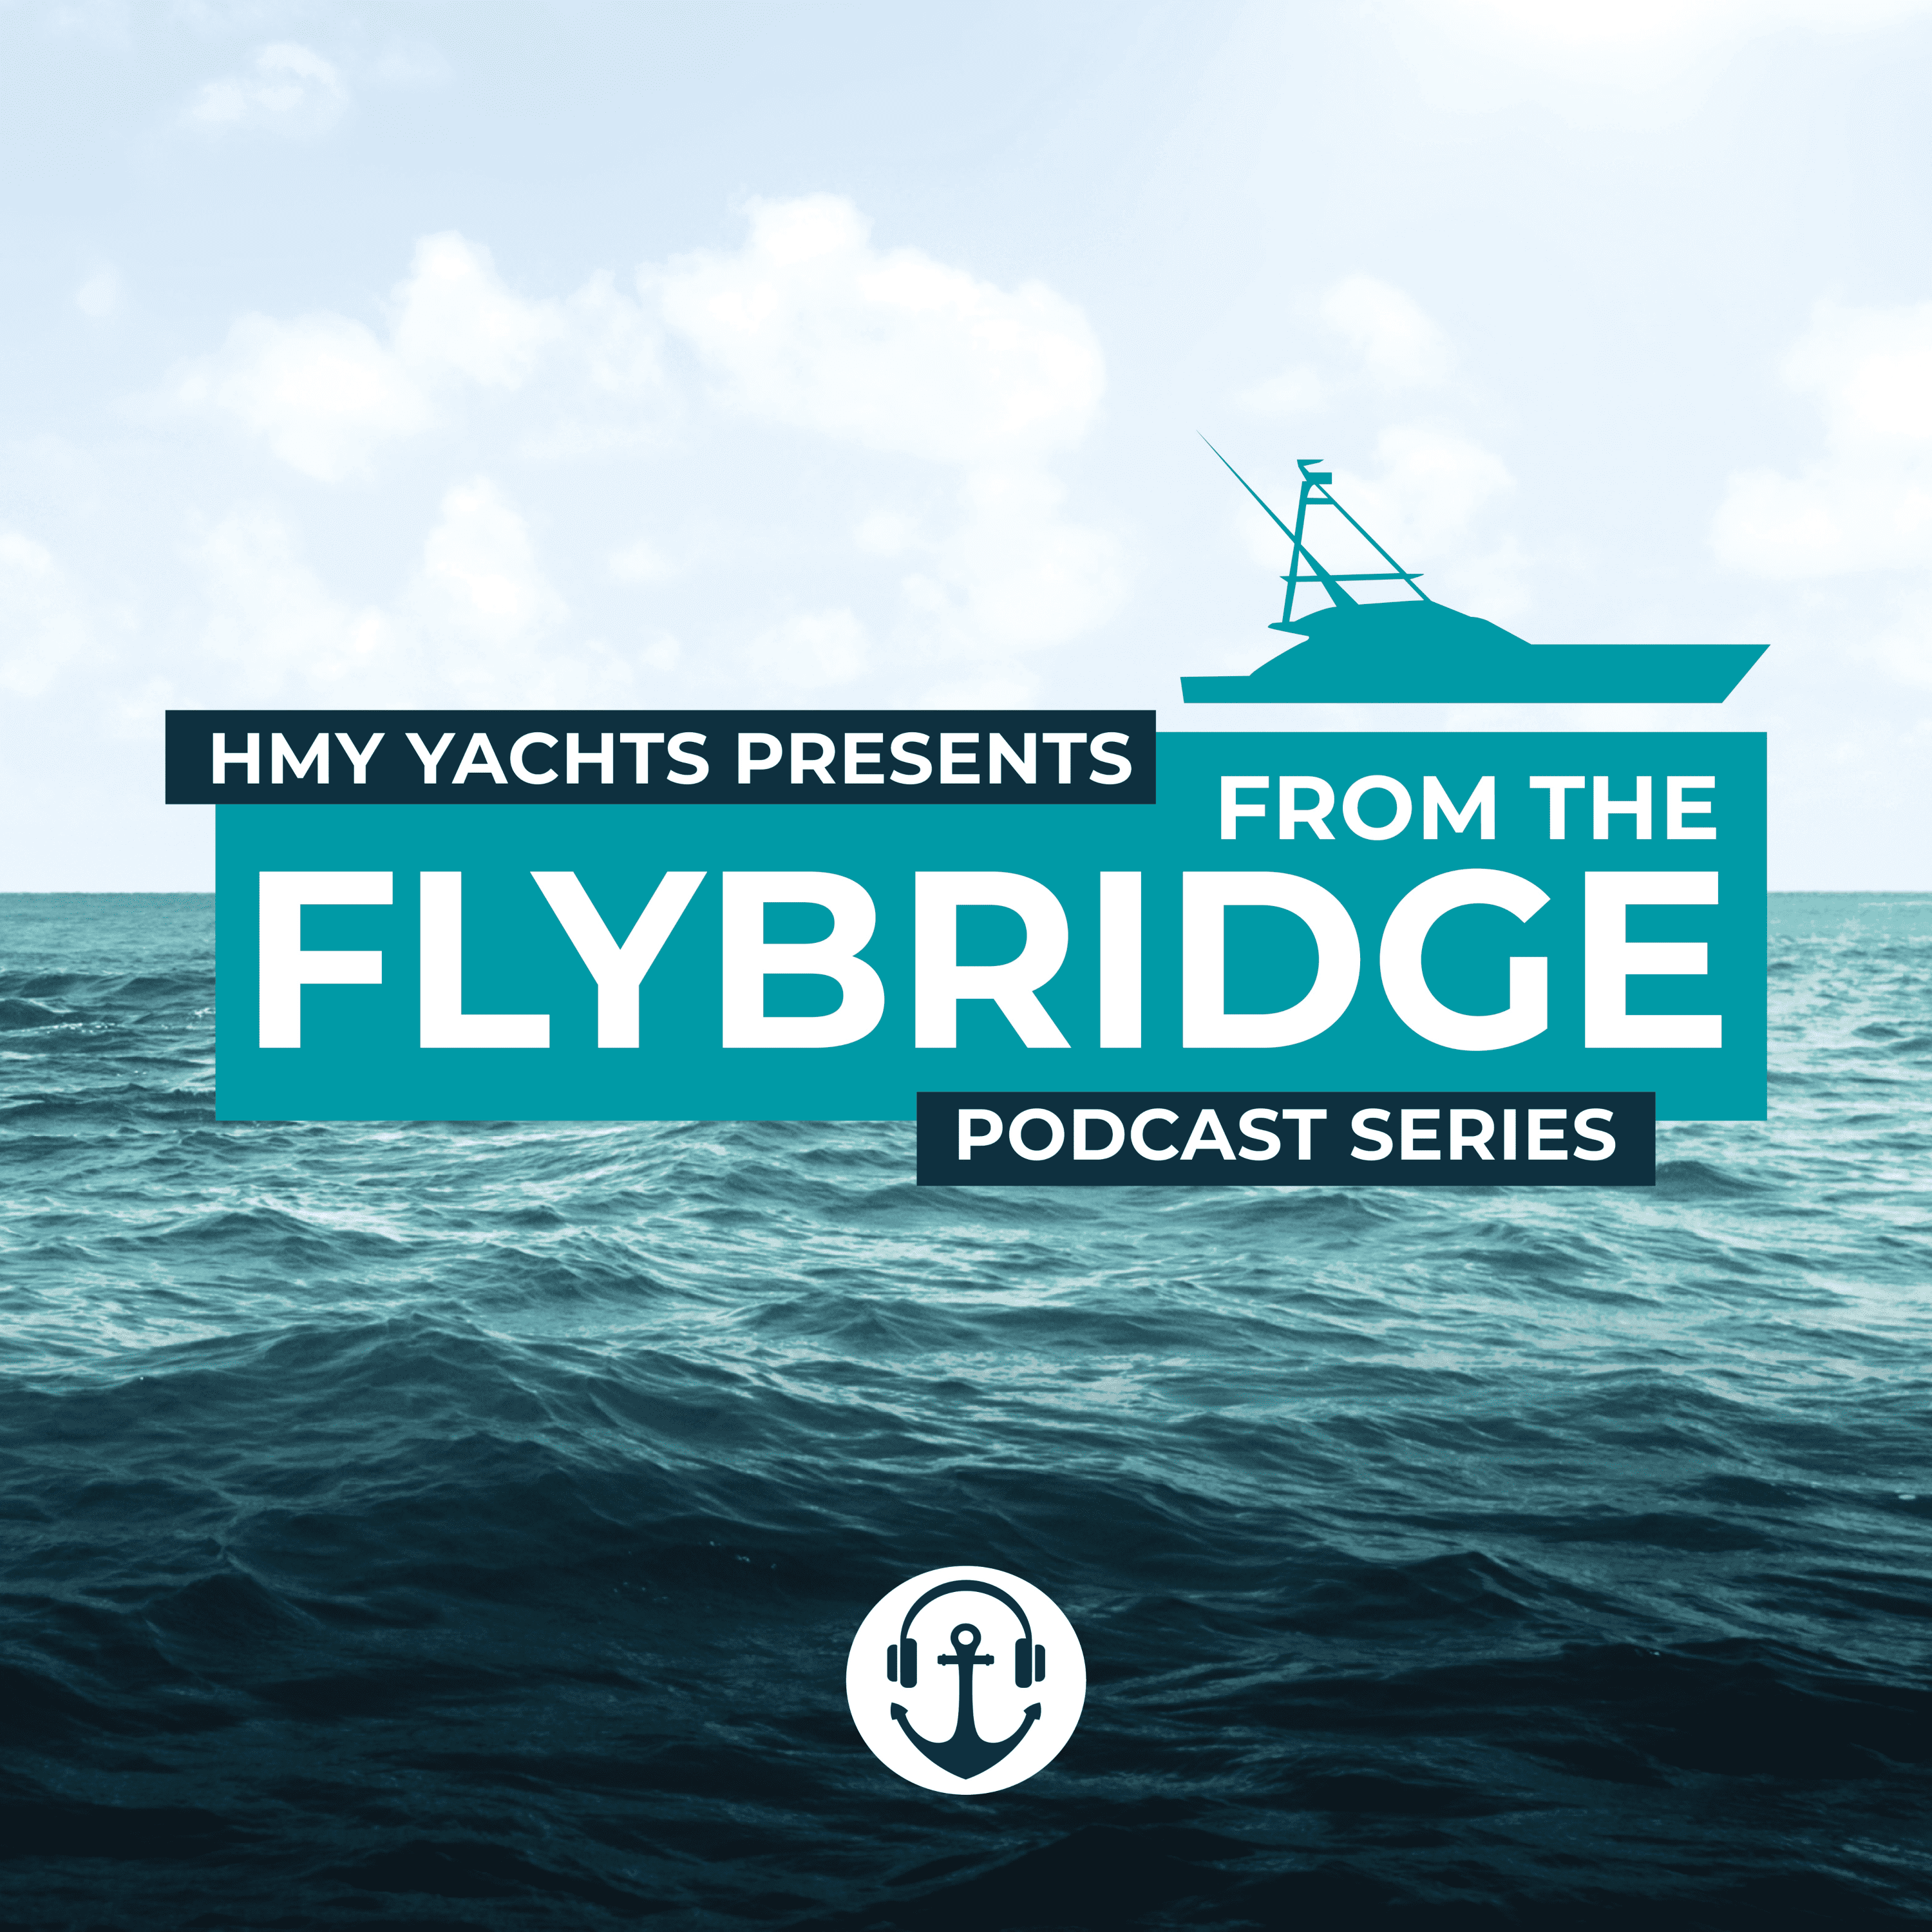 HMY Yachts Presents: From The Flybridge